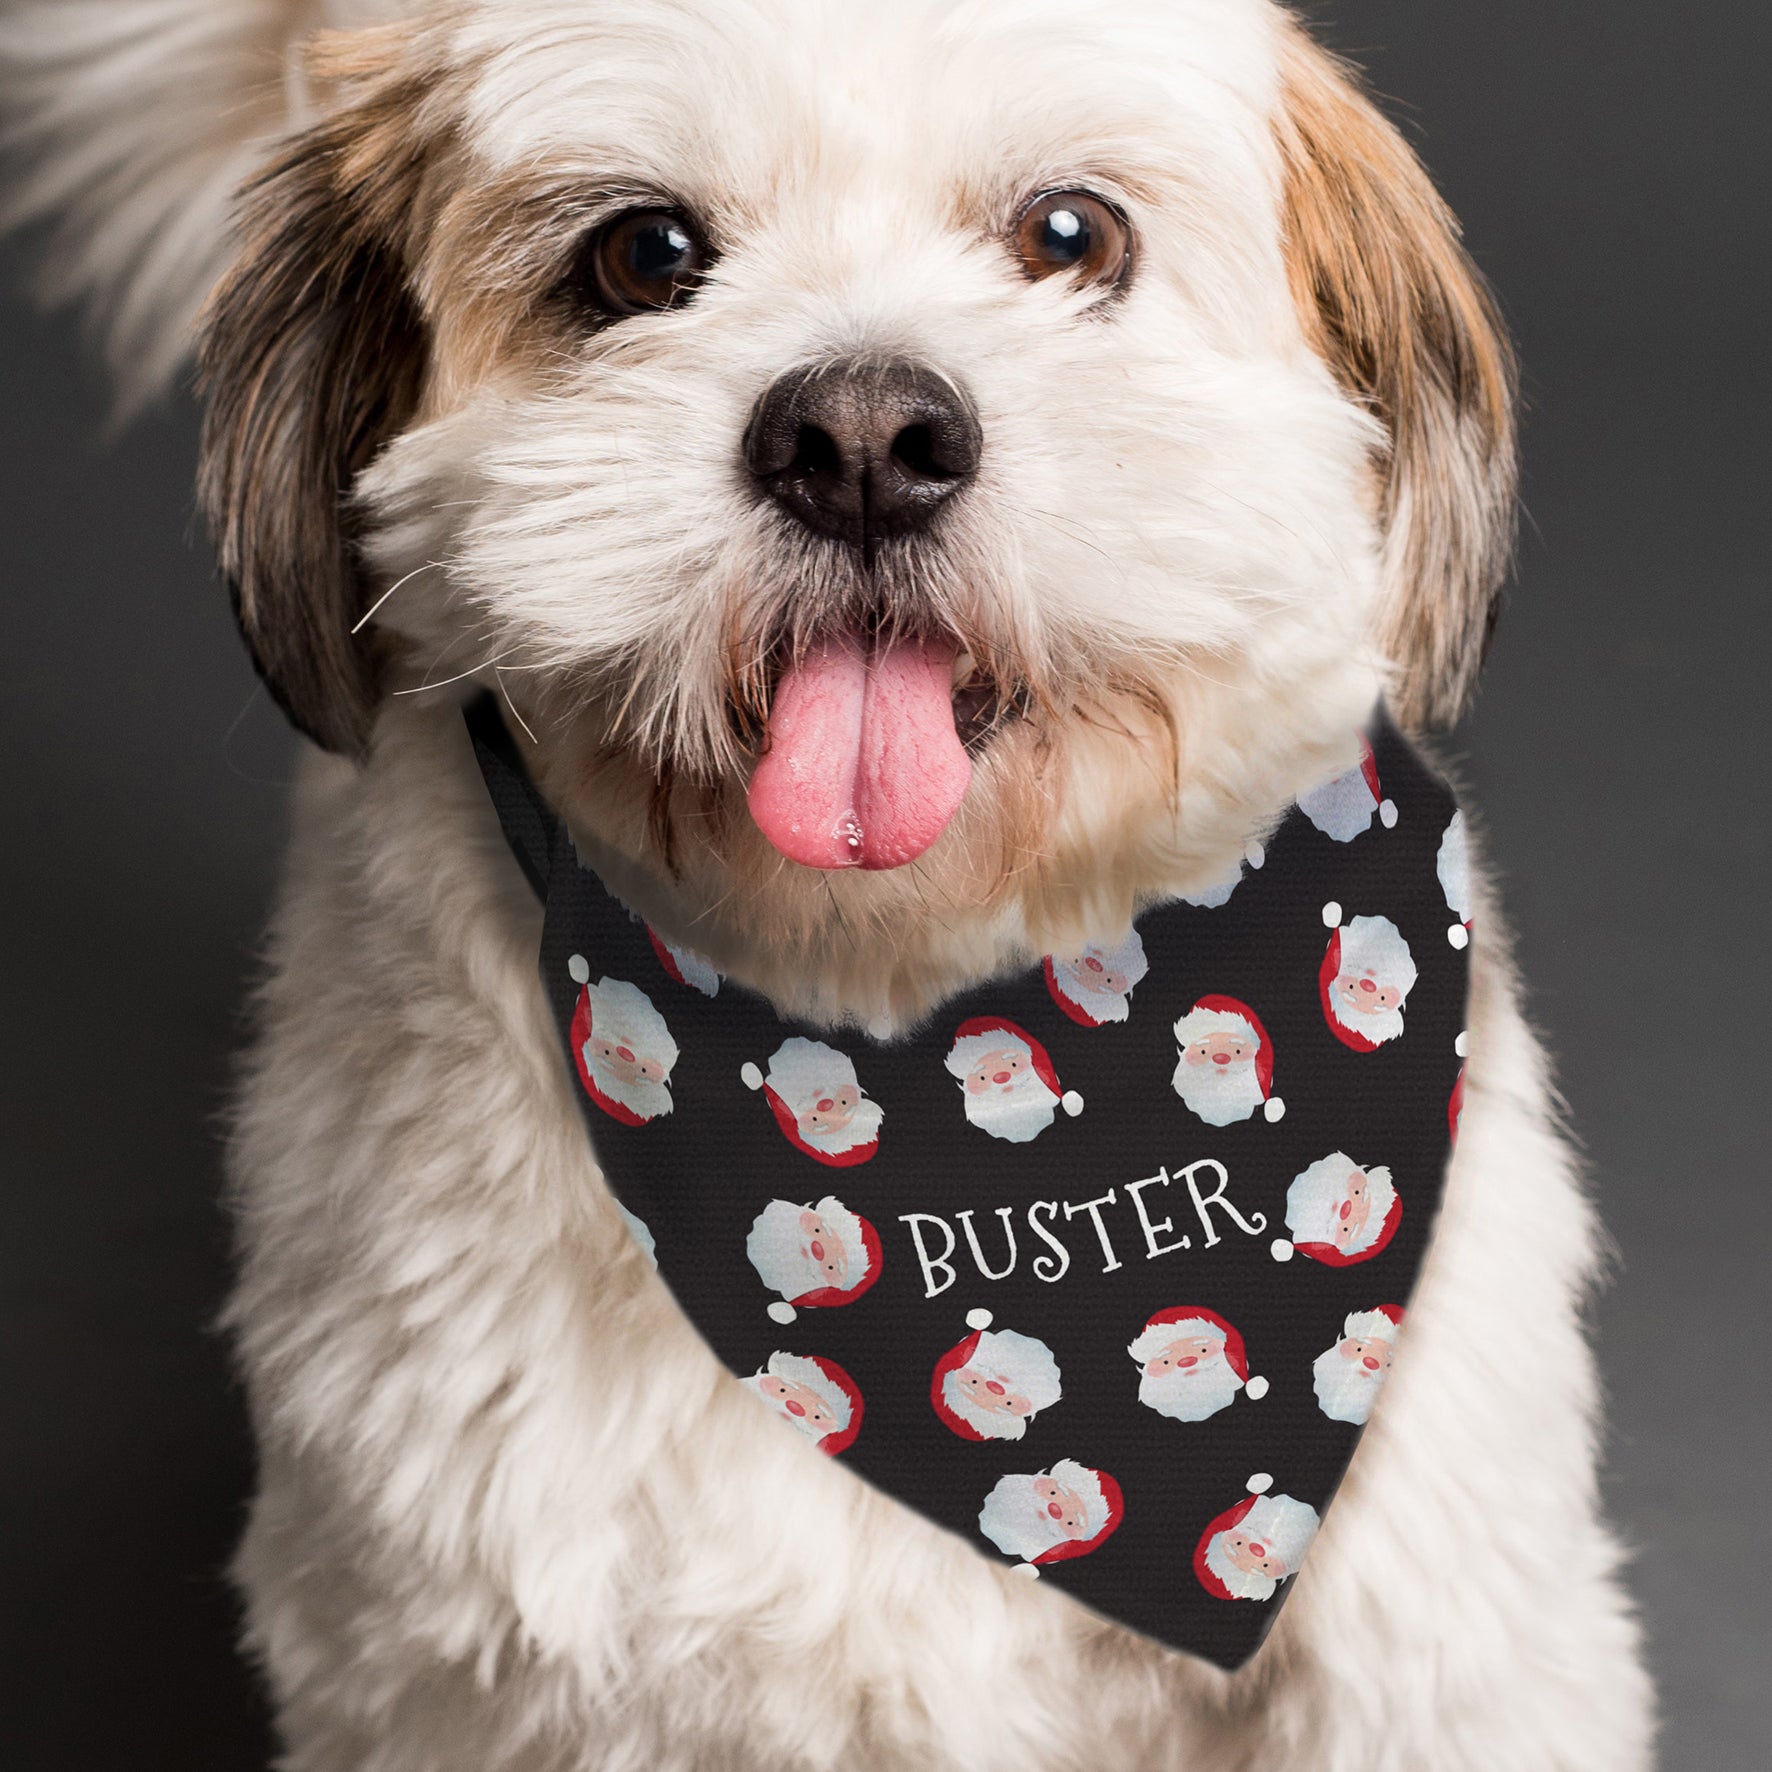 Image of a small dog wearing a personalised dog bandana around it's neck.  The bandana has a black background and has lots of smaller smiling Santa faces printed on it.  The middle of the bandana has space for a name of your choice to be printed in white upper case letters.  The bandana has a black strap which measures up to 43 cm long so it is suitable for small and medium sized dogs.